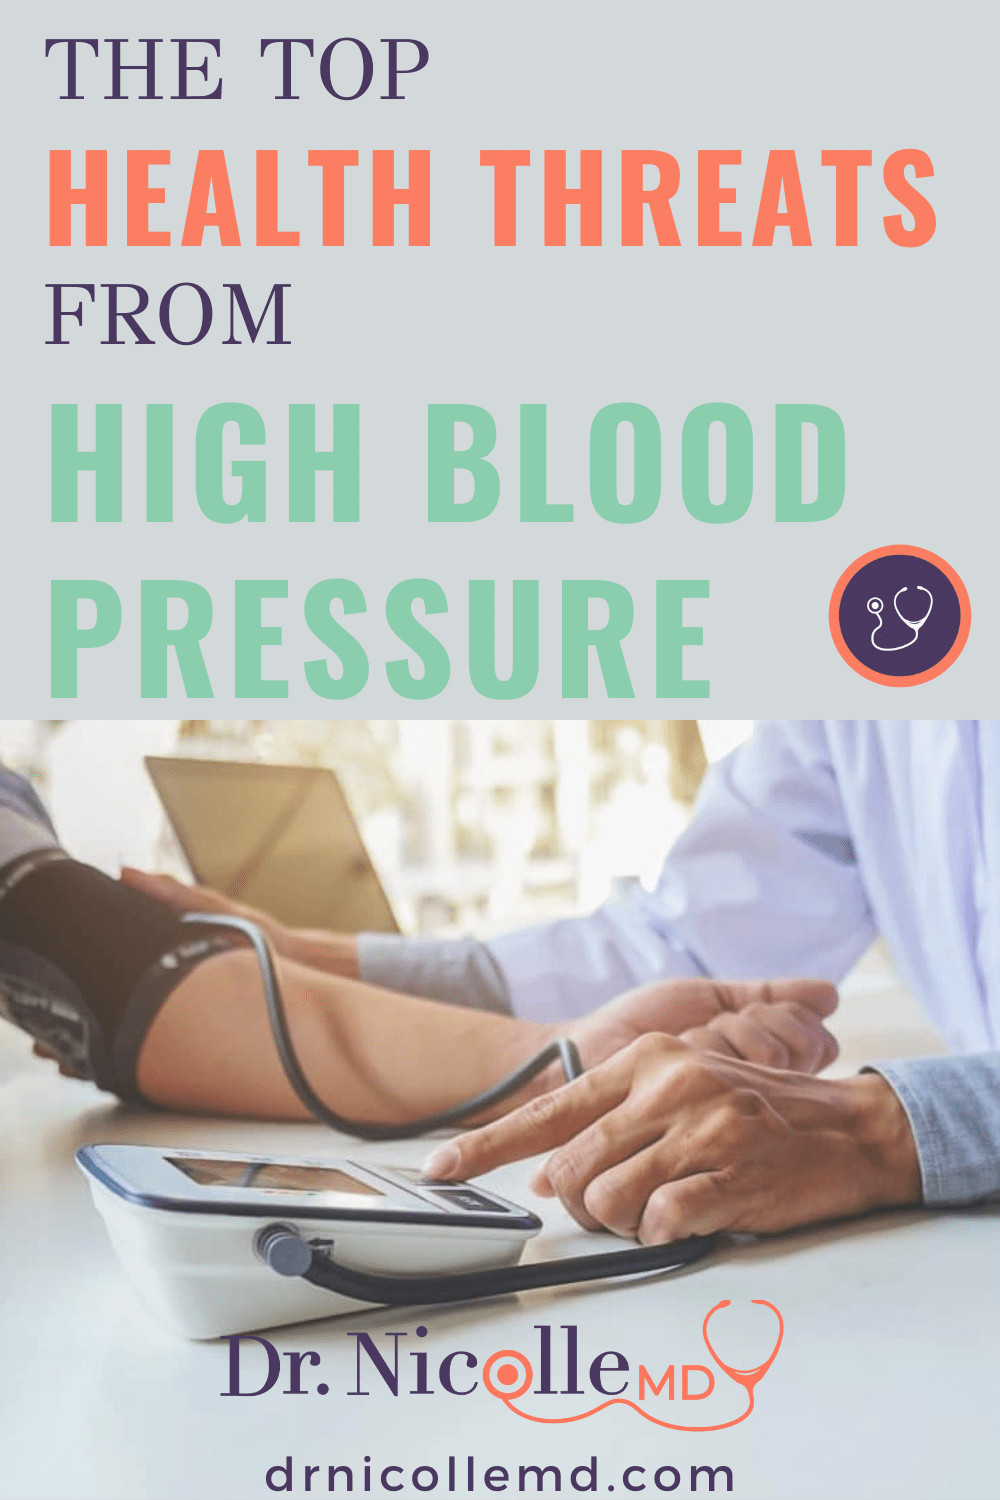 The Top Health Threats From High Blood Pressure